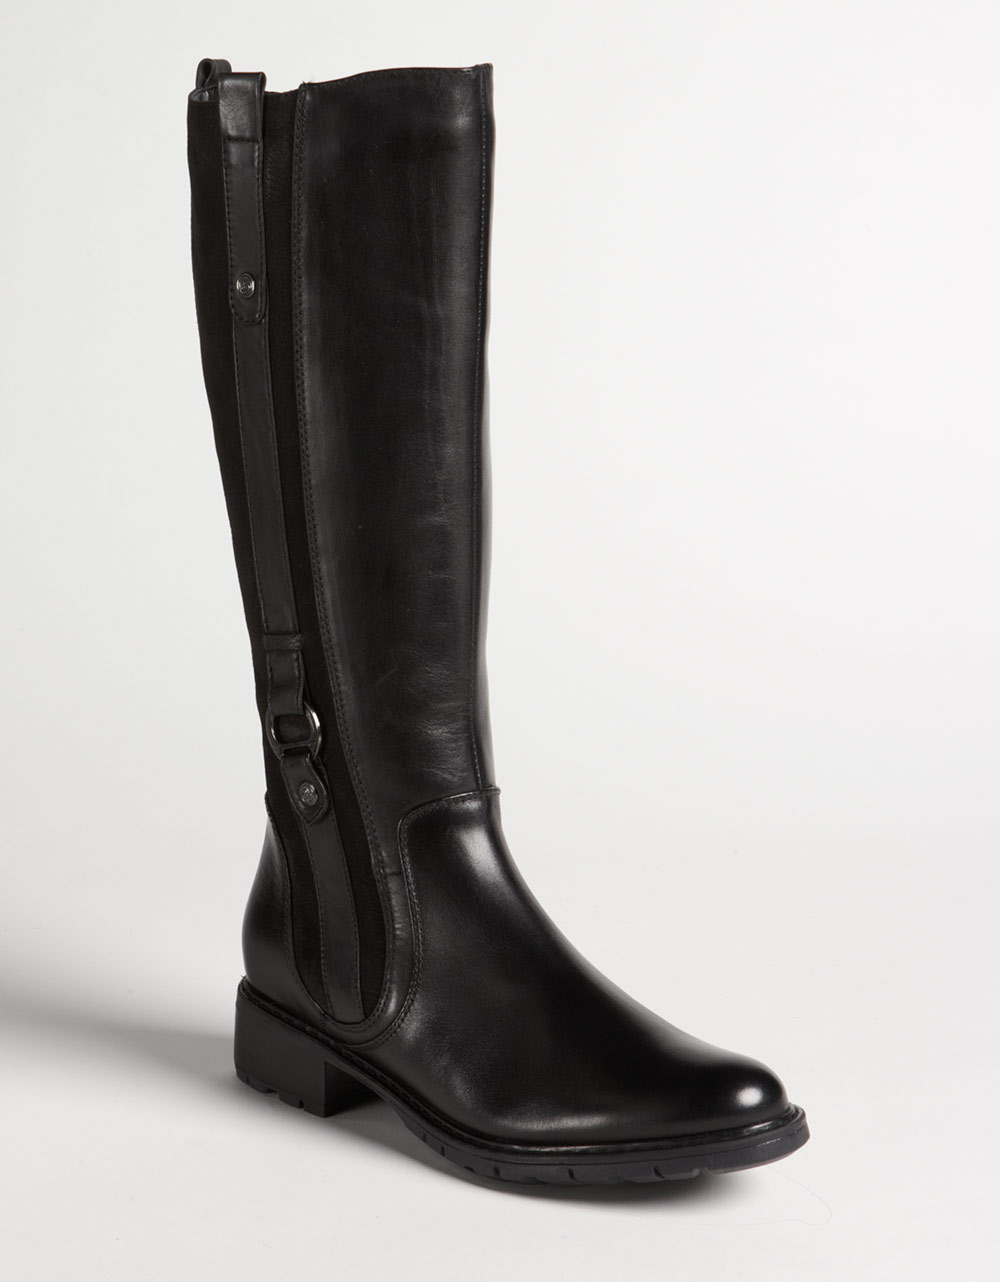 Blondo Varda Leather Tall Boots in Black - Lyst